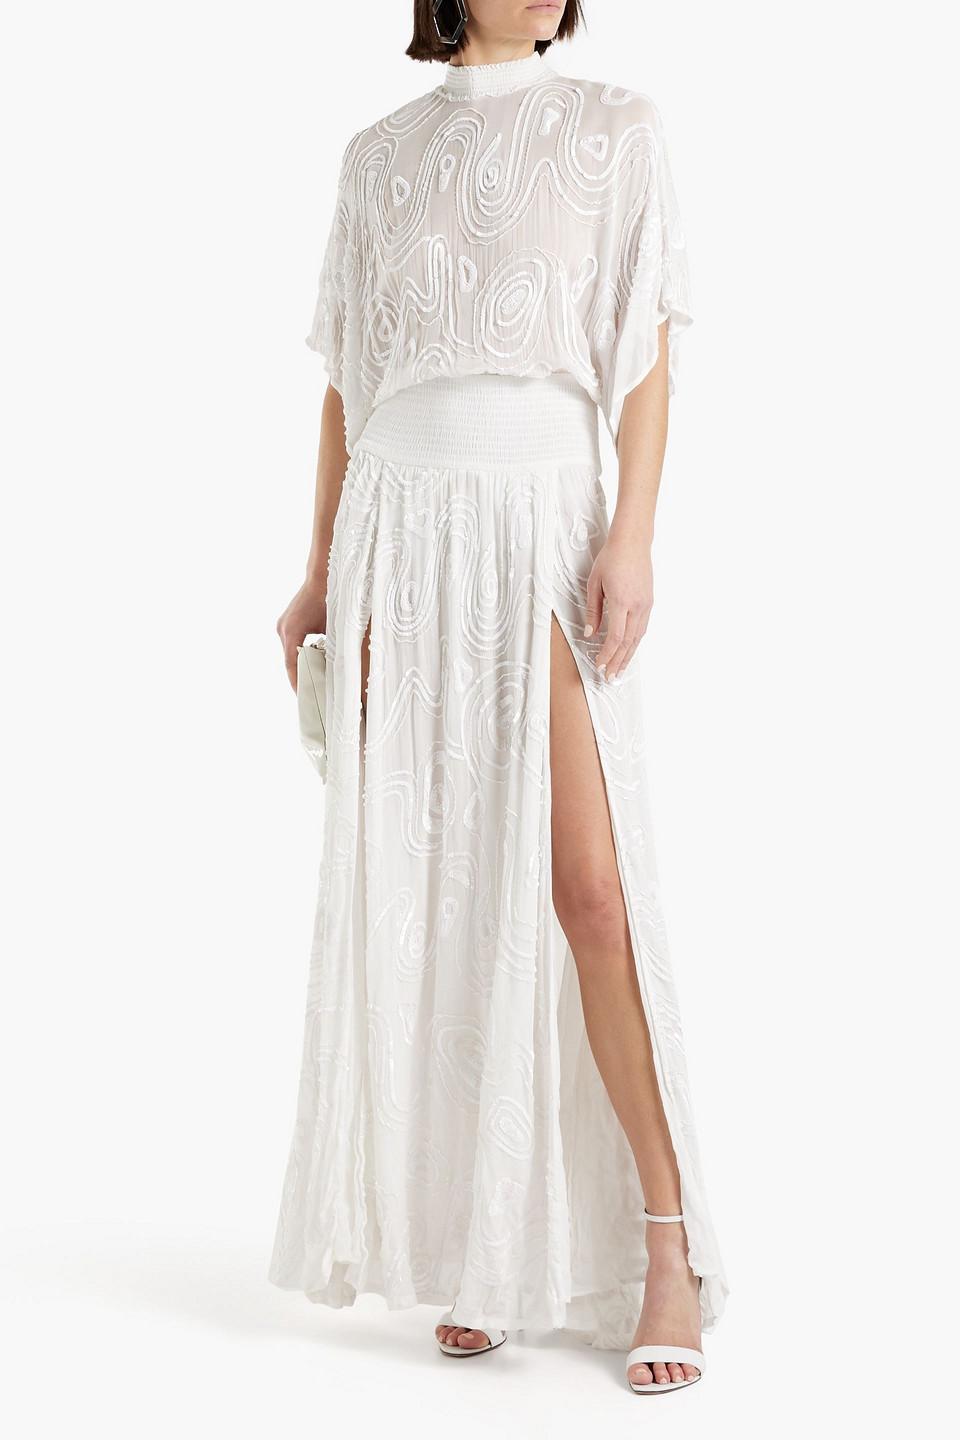 Chloe White Tulle High-Low Maxi Dress